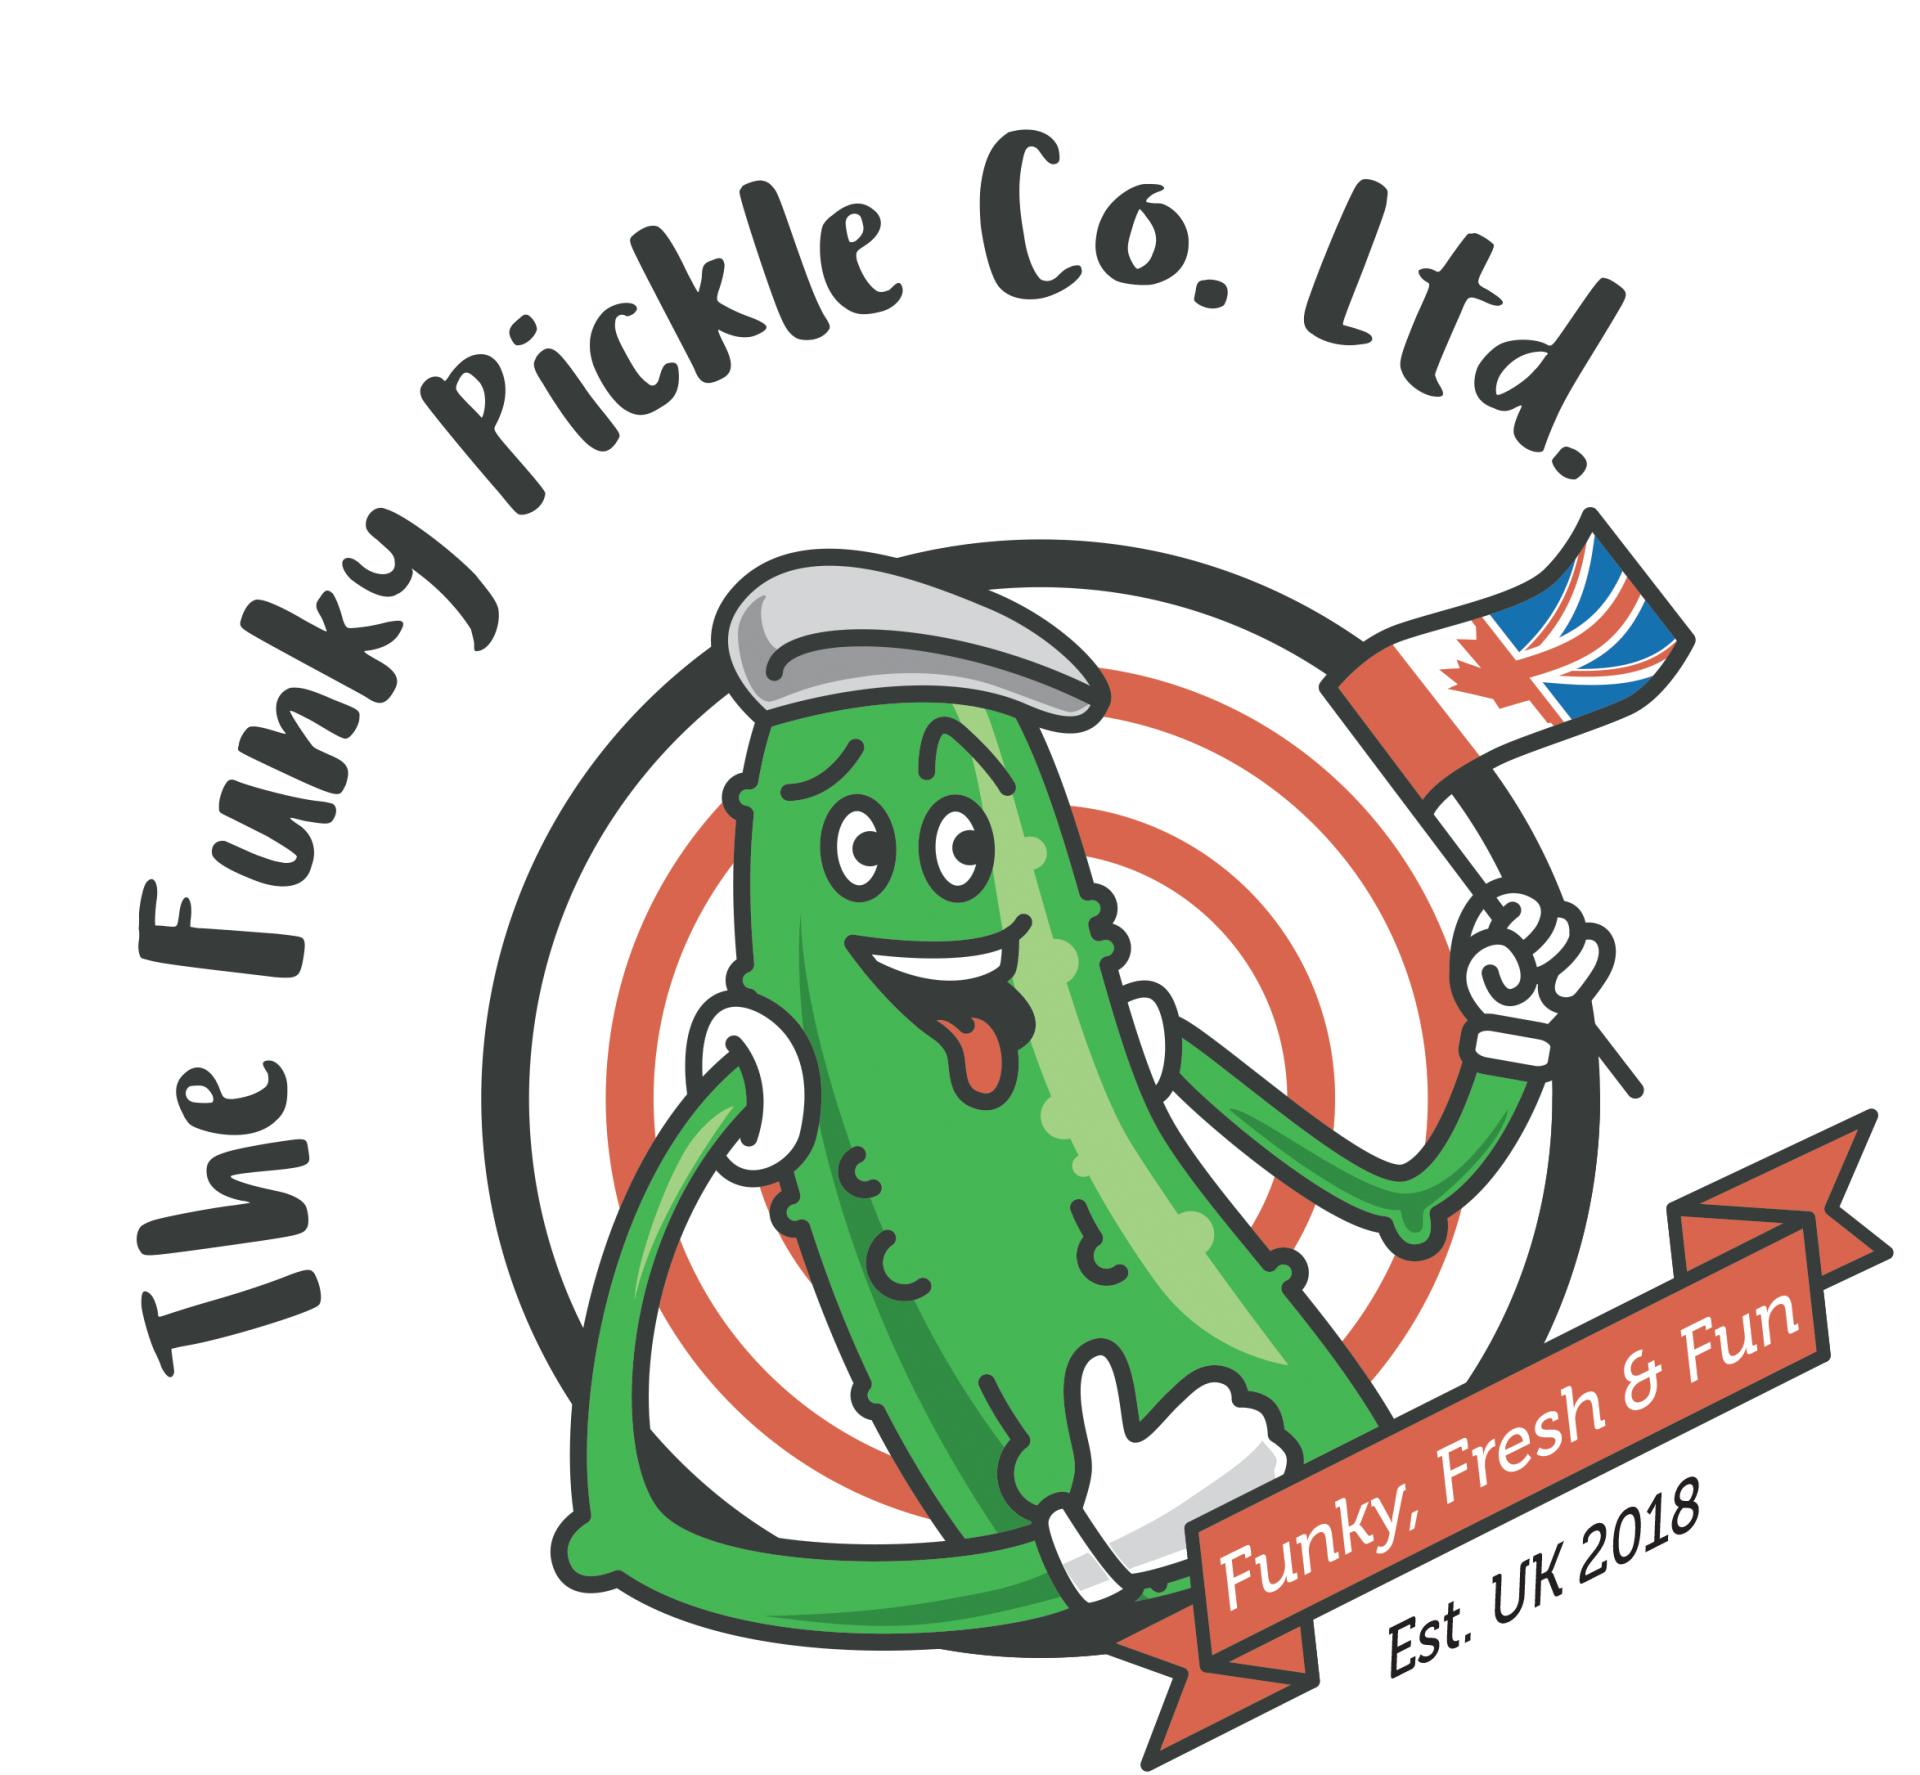 The Funky Pickle Co. Ltd